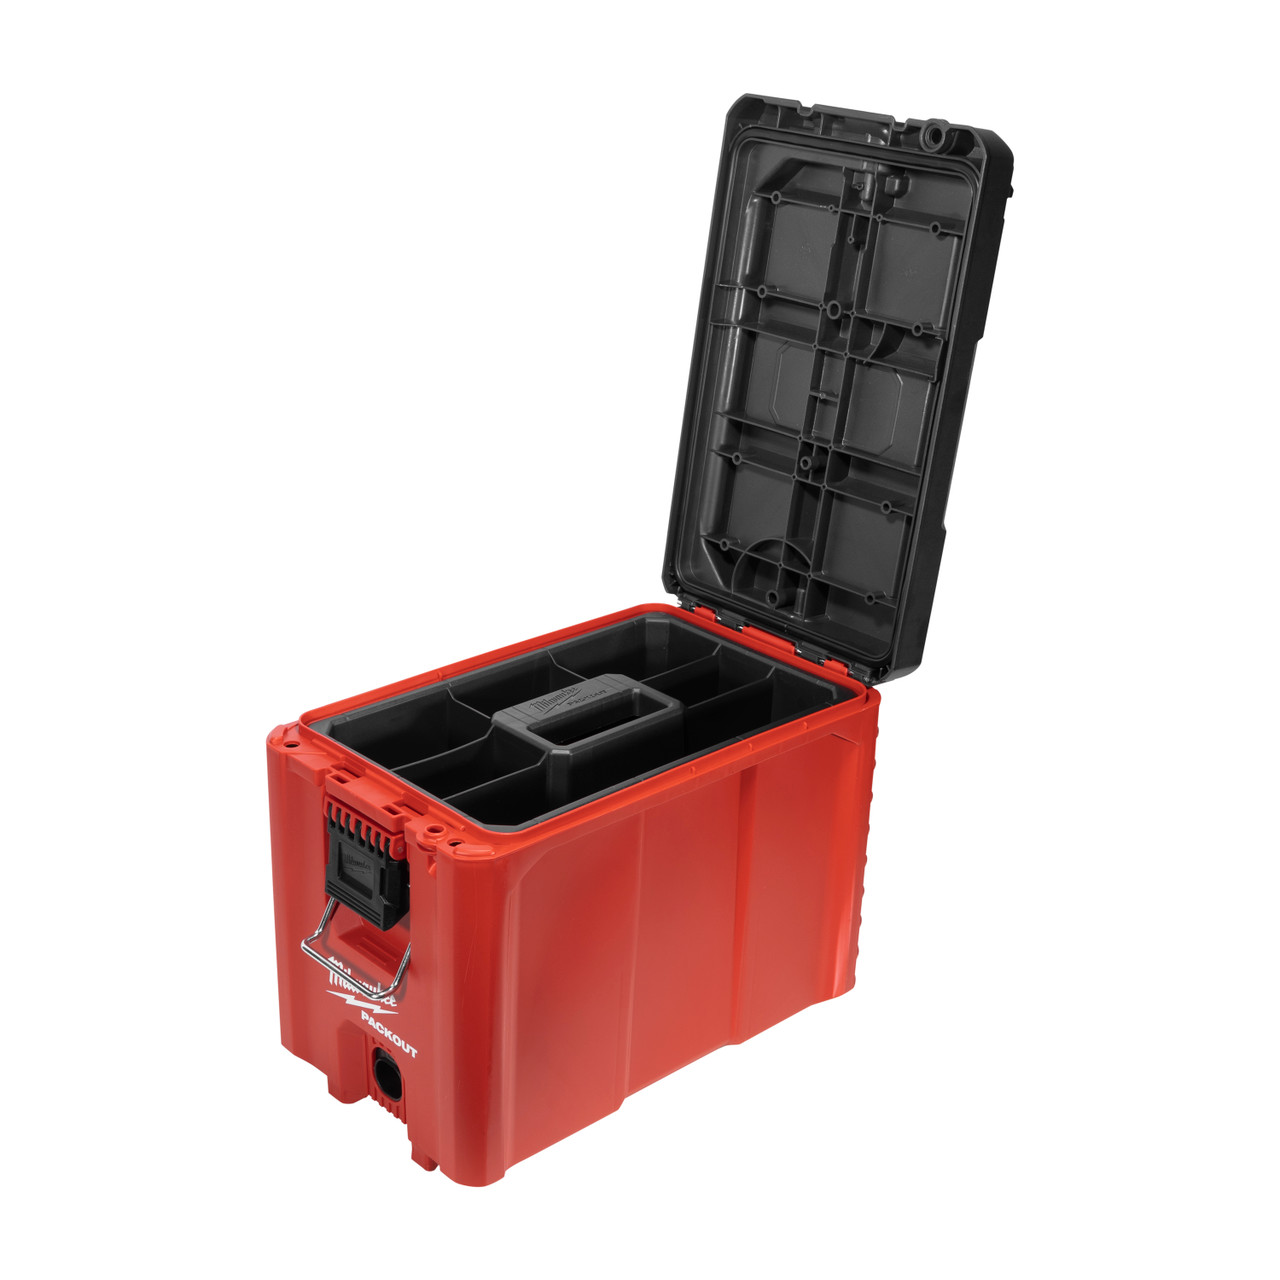 Milwaukee 48-22-8422 PACKOUT 10 in. Compact Tool Box